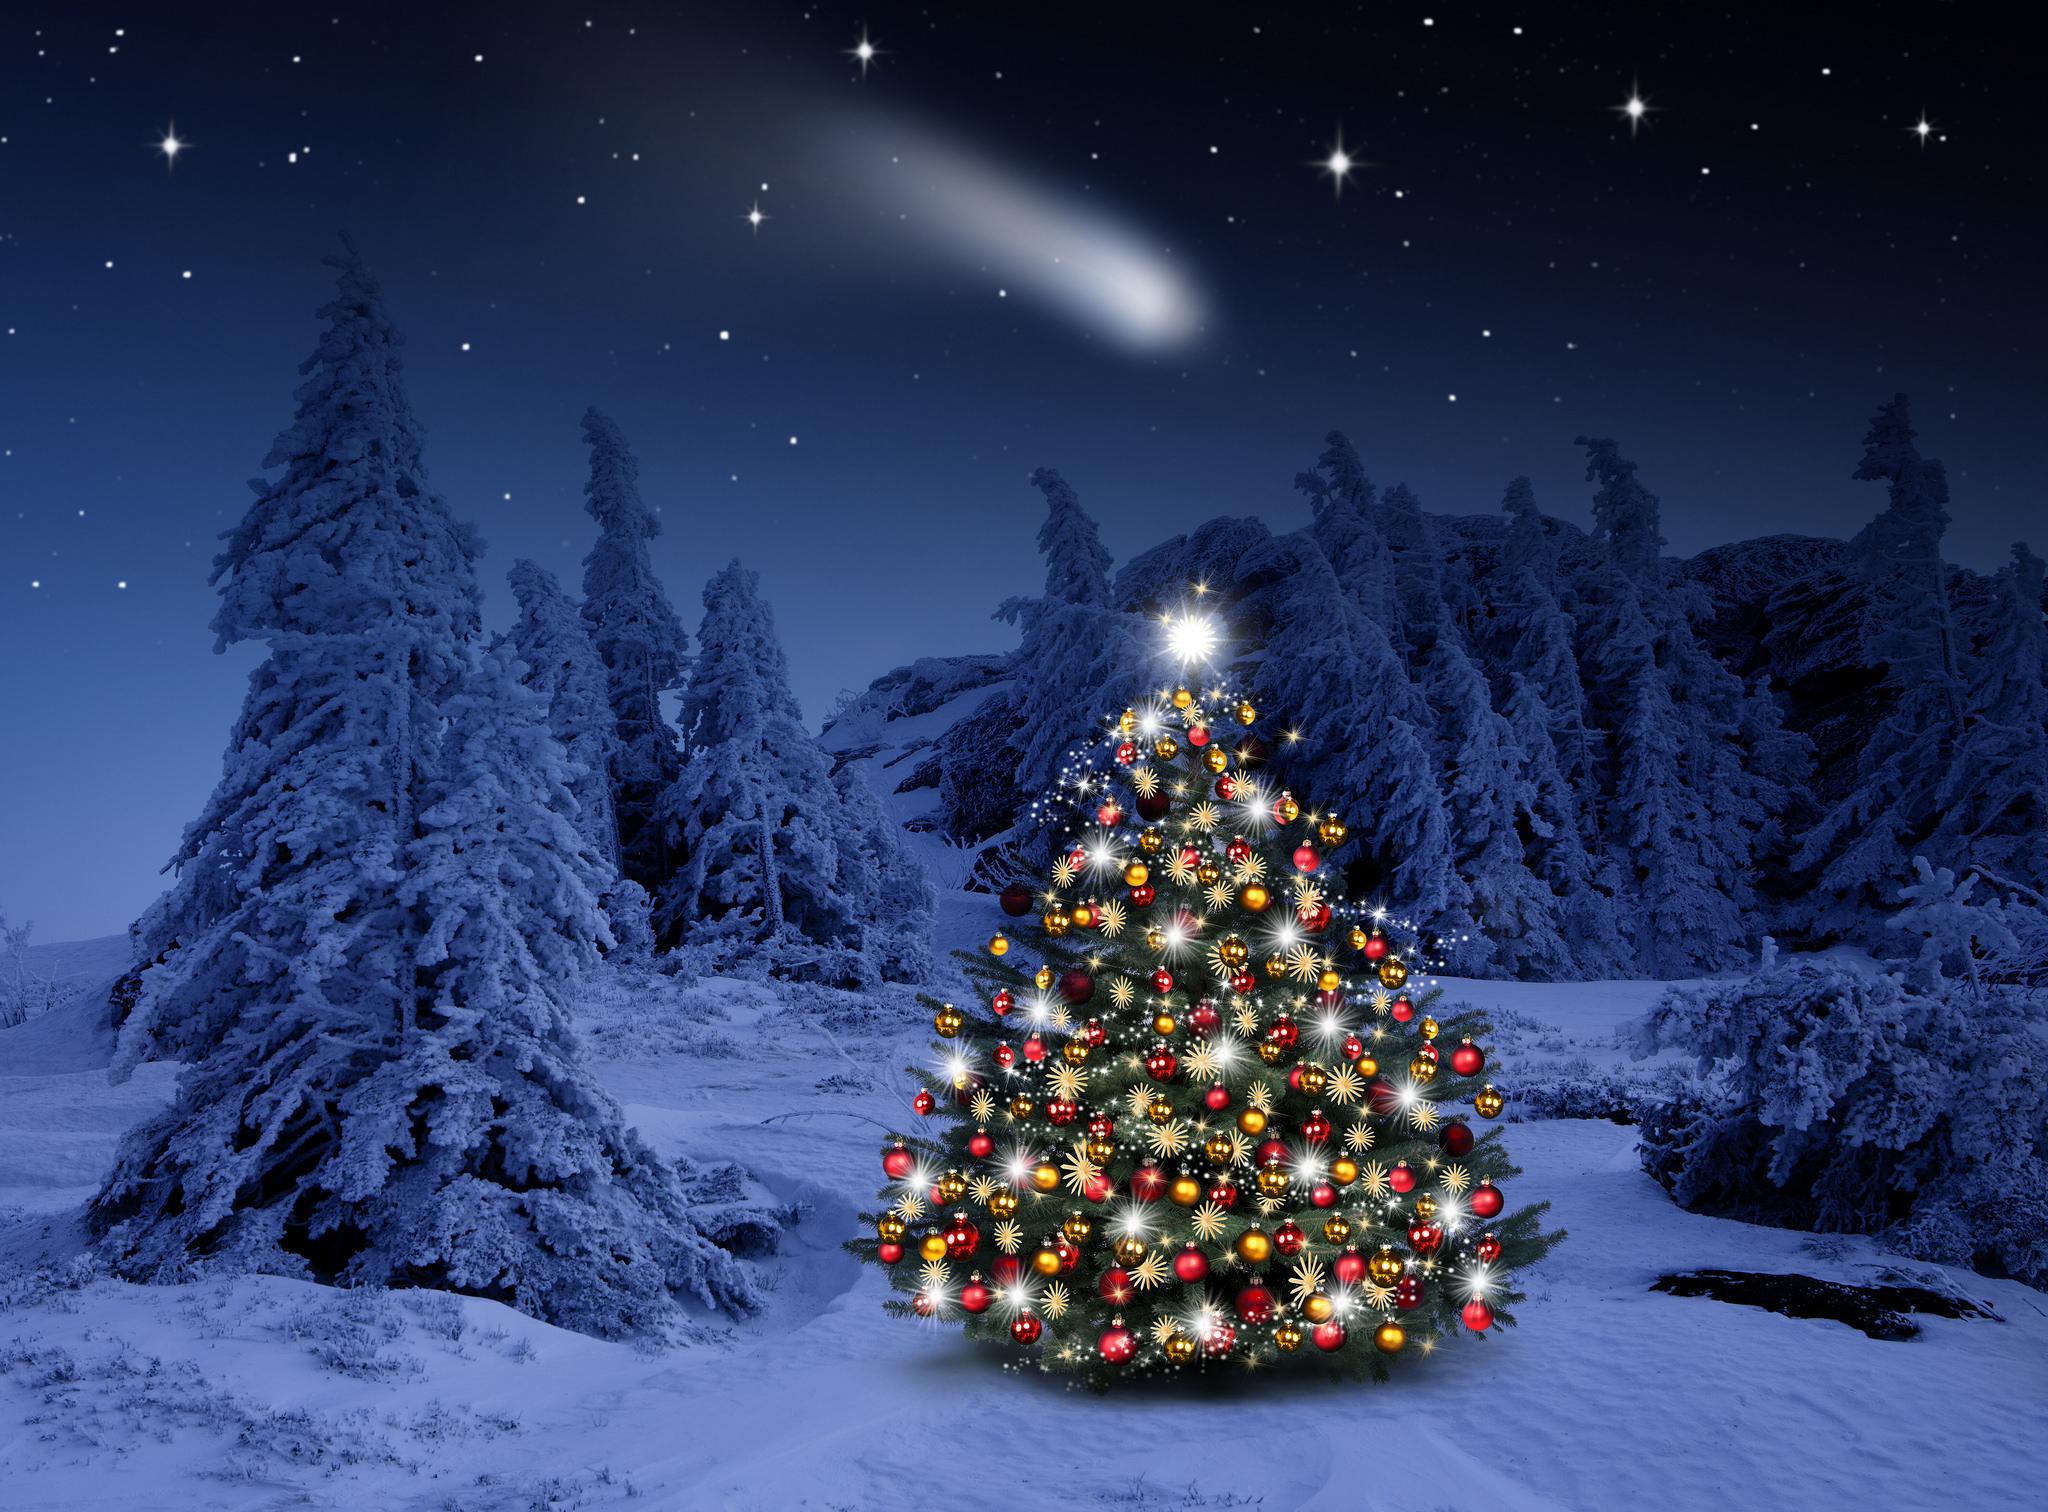 Lighted Christmas Tree In Winter Forest